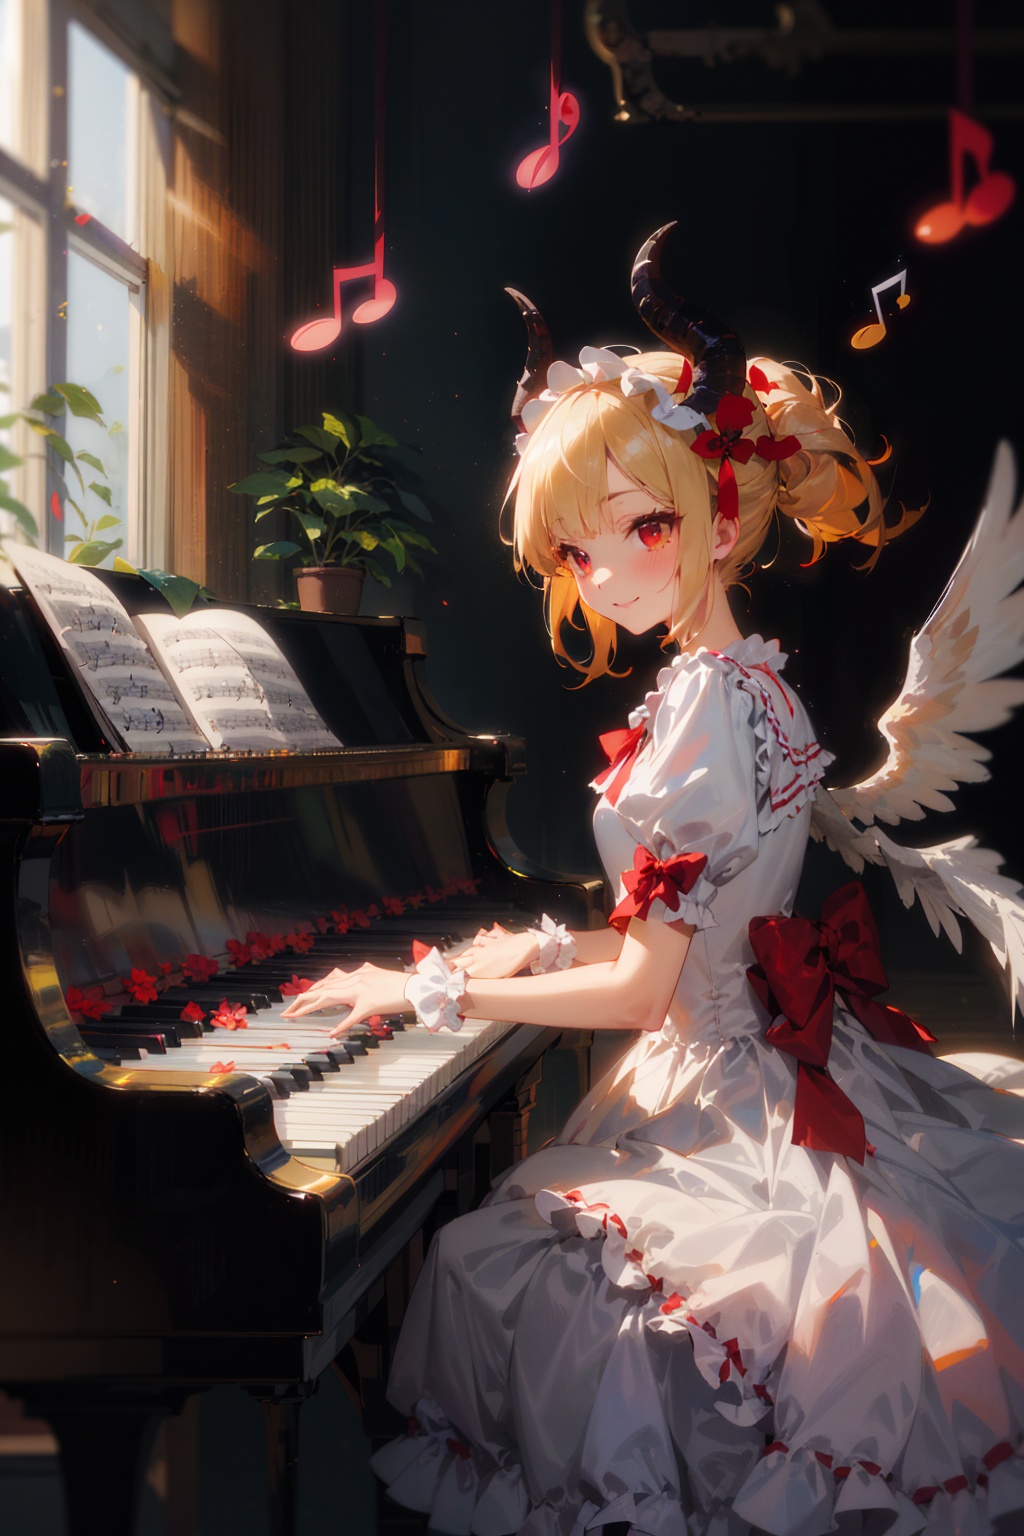 masterpiece,best quality,(ray tracing,cinematic lighting), (outline), (emphasis lines), (detailed 8K wallpaper) (from side), (cowboy shot), (1 girl playing piano:1.2), sitting, (floating musical note around girl:1.4), detailed European piano The girl has (long yellow hair), red eyes, eyes half closed, smile, has(a pair of large black wings), (solo) The girl wearing (white lolita dress with a red bow), hair flower, (ram horns), (eromanga:1.2), (megami:1.2), (lolita fashion:1.2) BREAK (Detailed musical notes:1.2), piano, detailed room, (greenhouse) Blurred background, fog in the distance, (Potted plants background), window